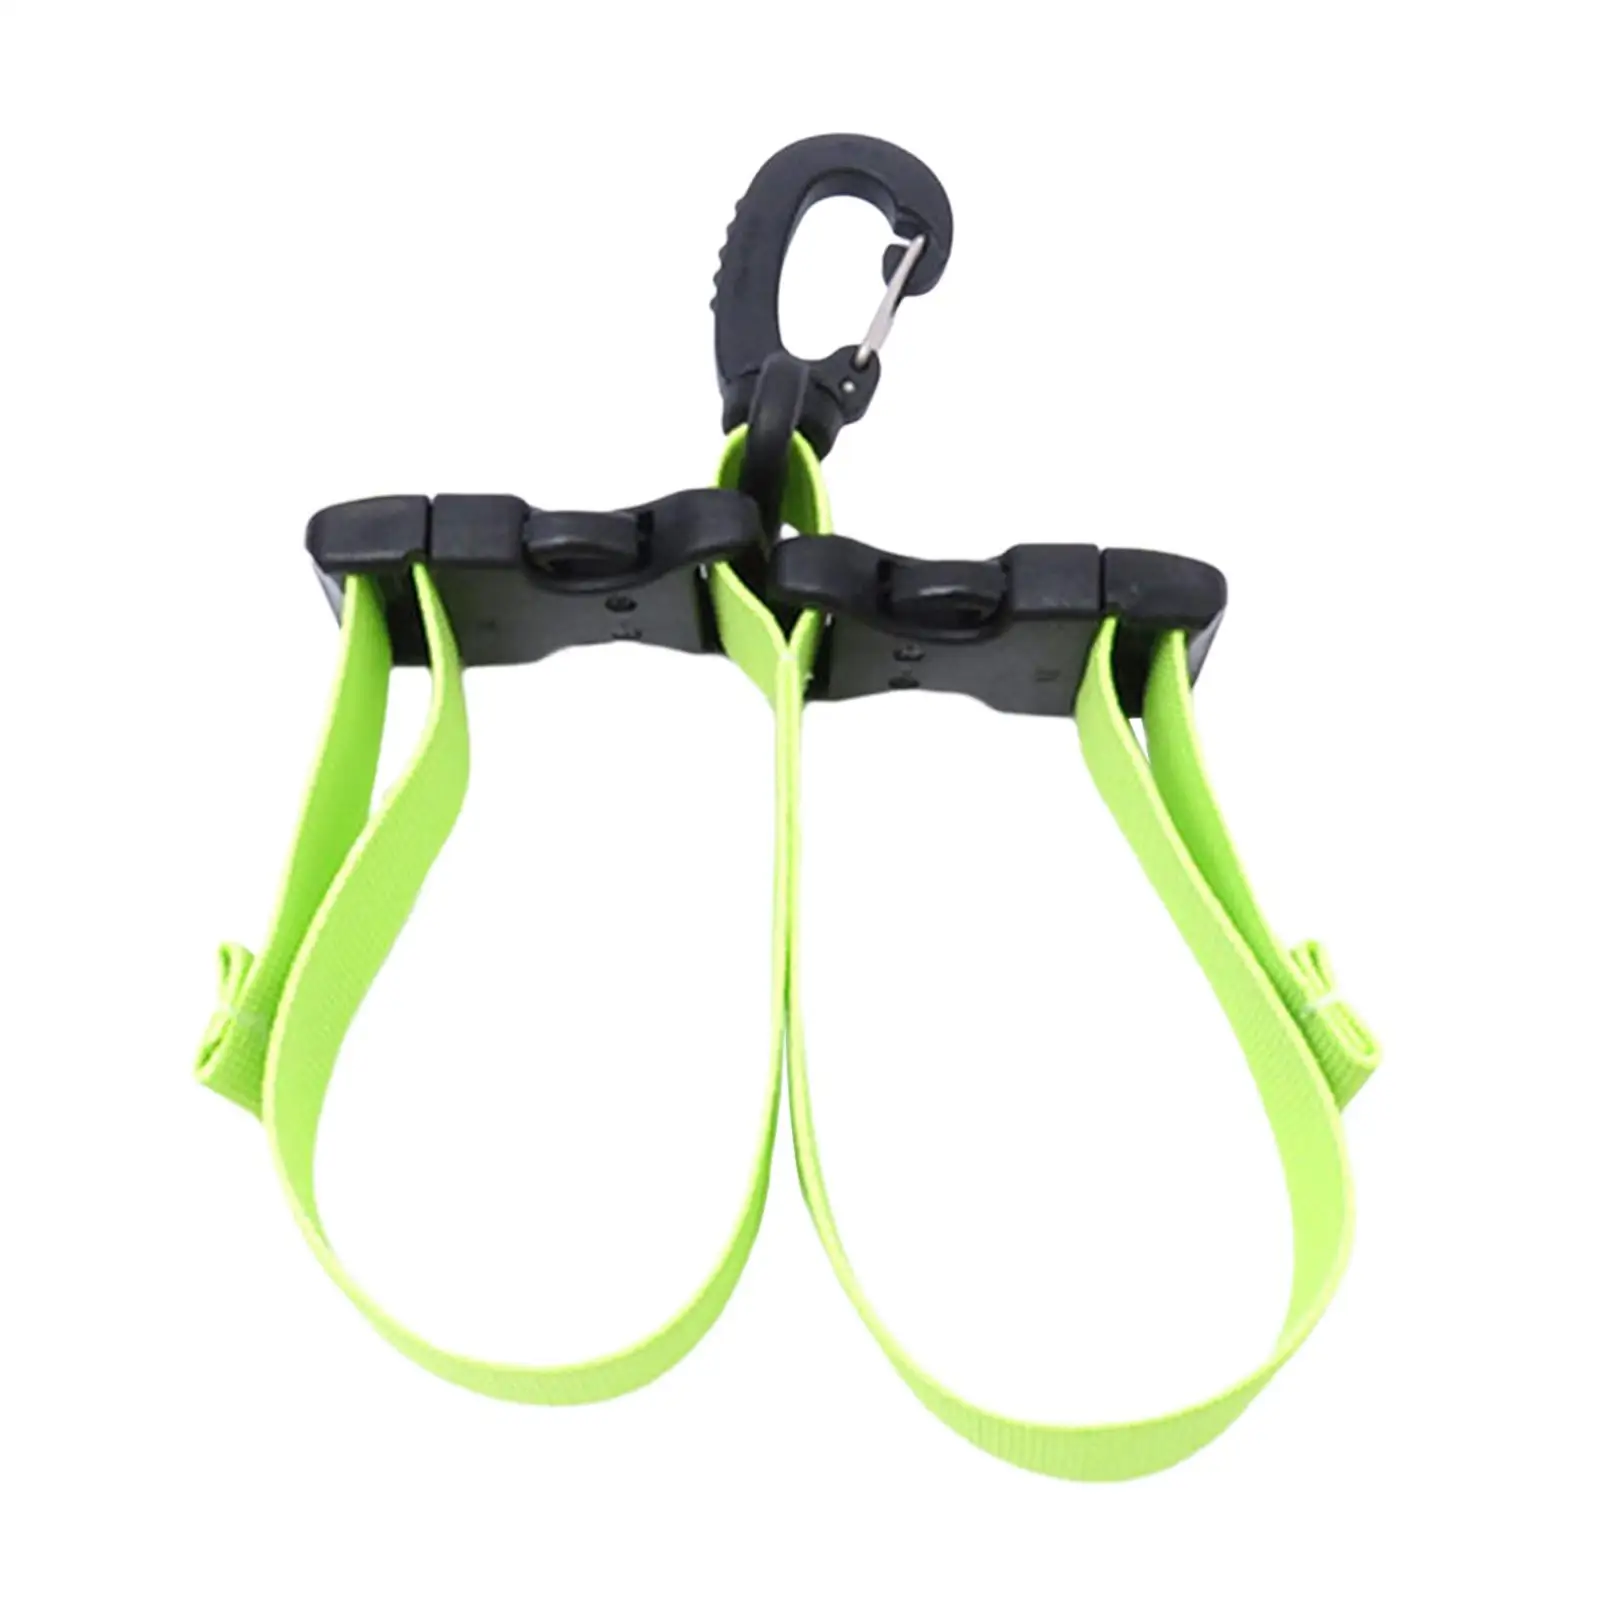 Diving Fins Strap Adjustable Universal Hanging Buckles Double Buckles Scuba Fins Strap Quick Release Buckles for Swimming Adult